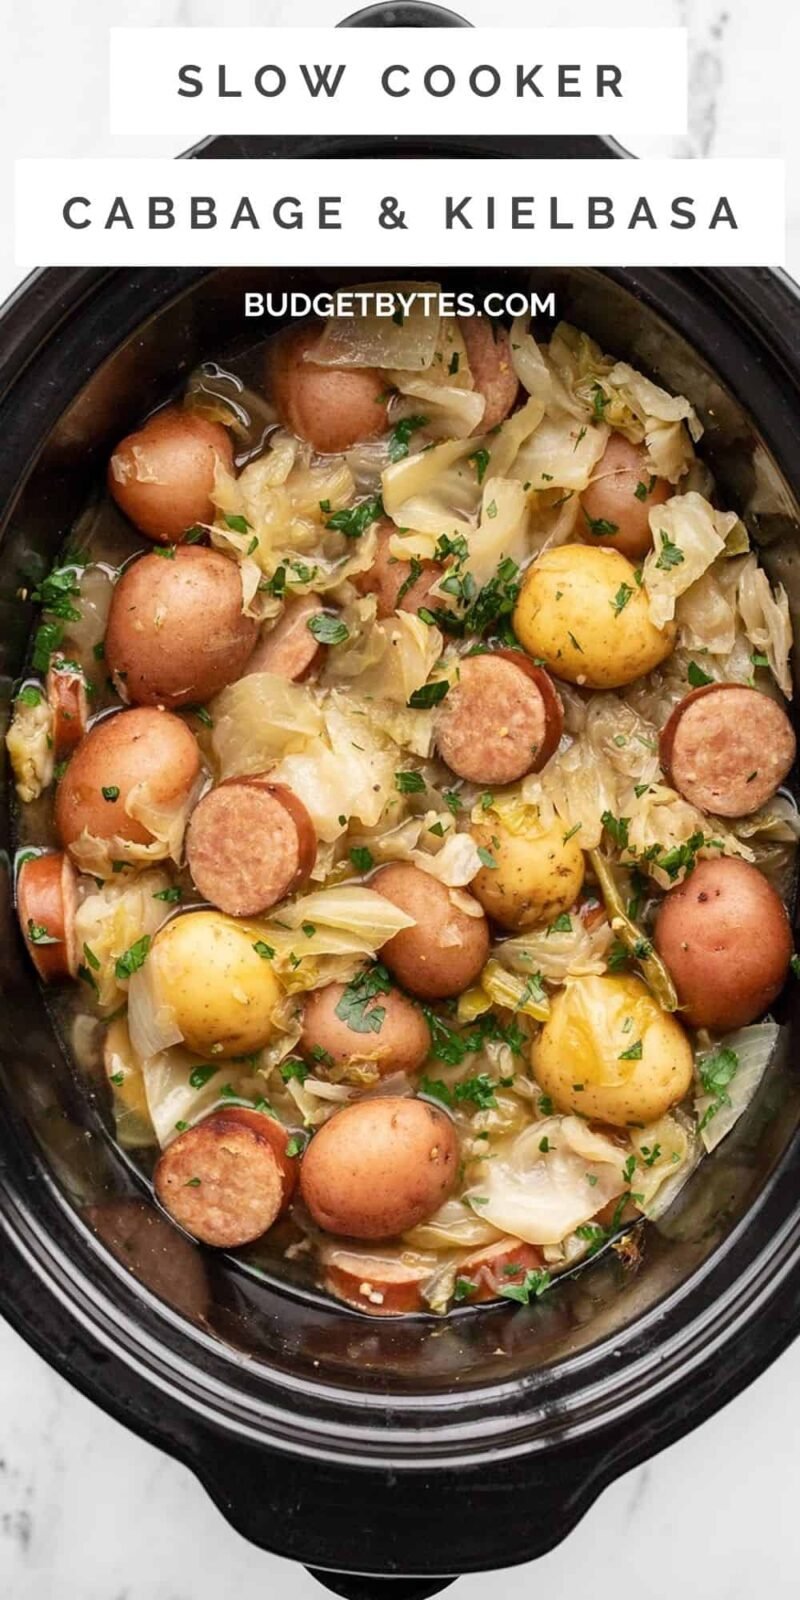 Overhead view of cabbage, sausage, and potatoes in the slow cooker, title text at the top